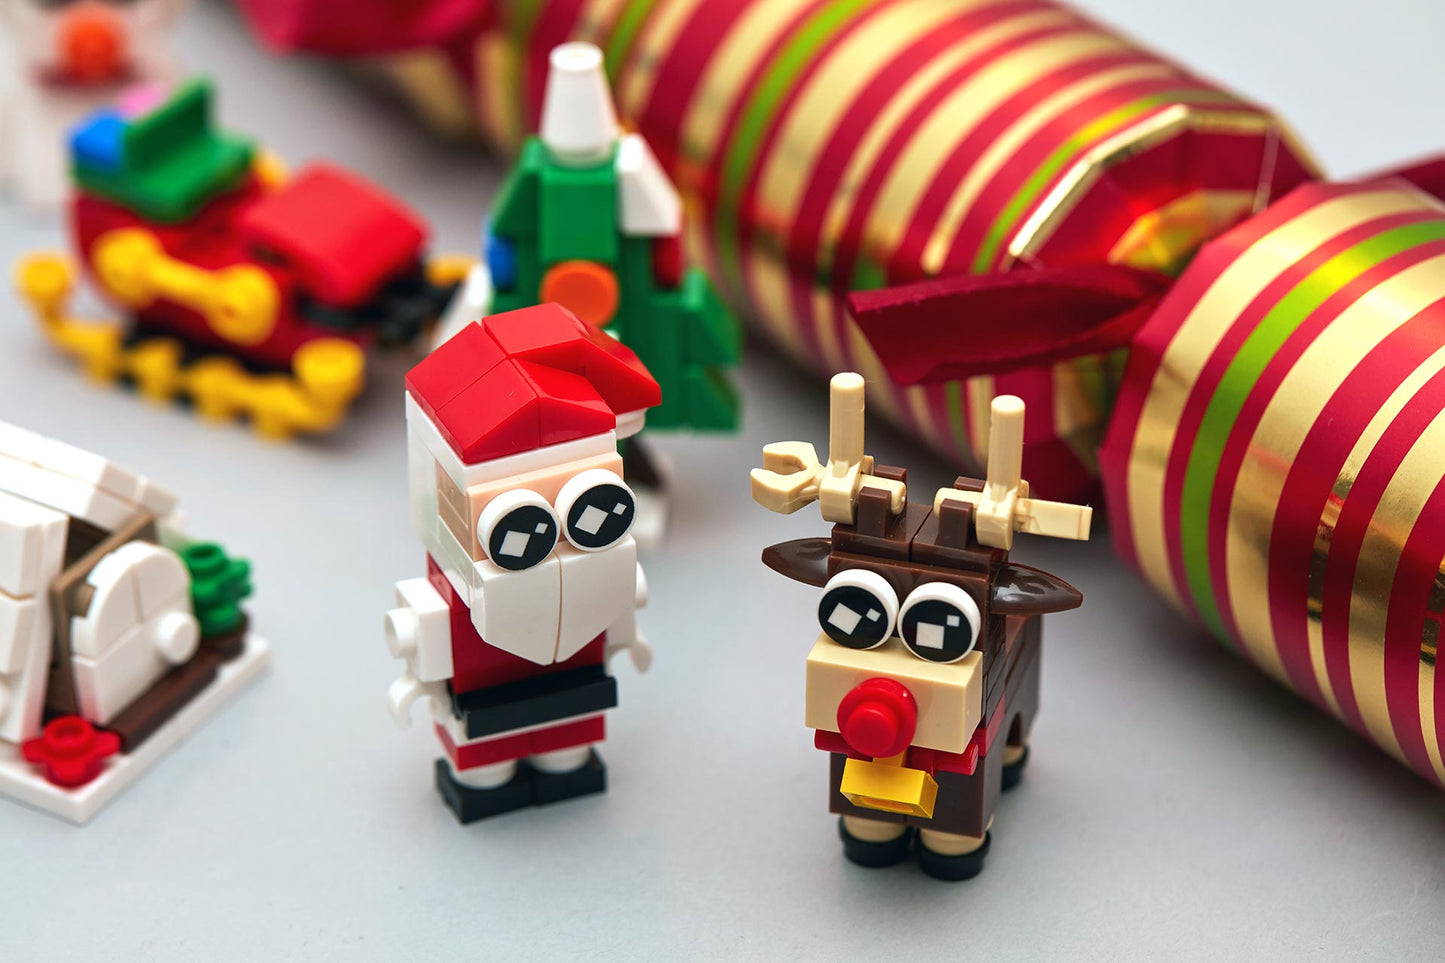 Christmas Building Block Christmas Crackers  (6 x 12-inch Crackers)